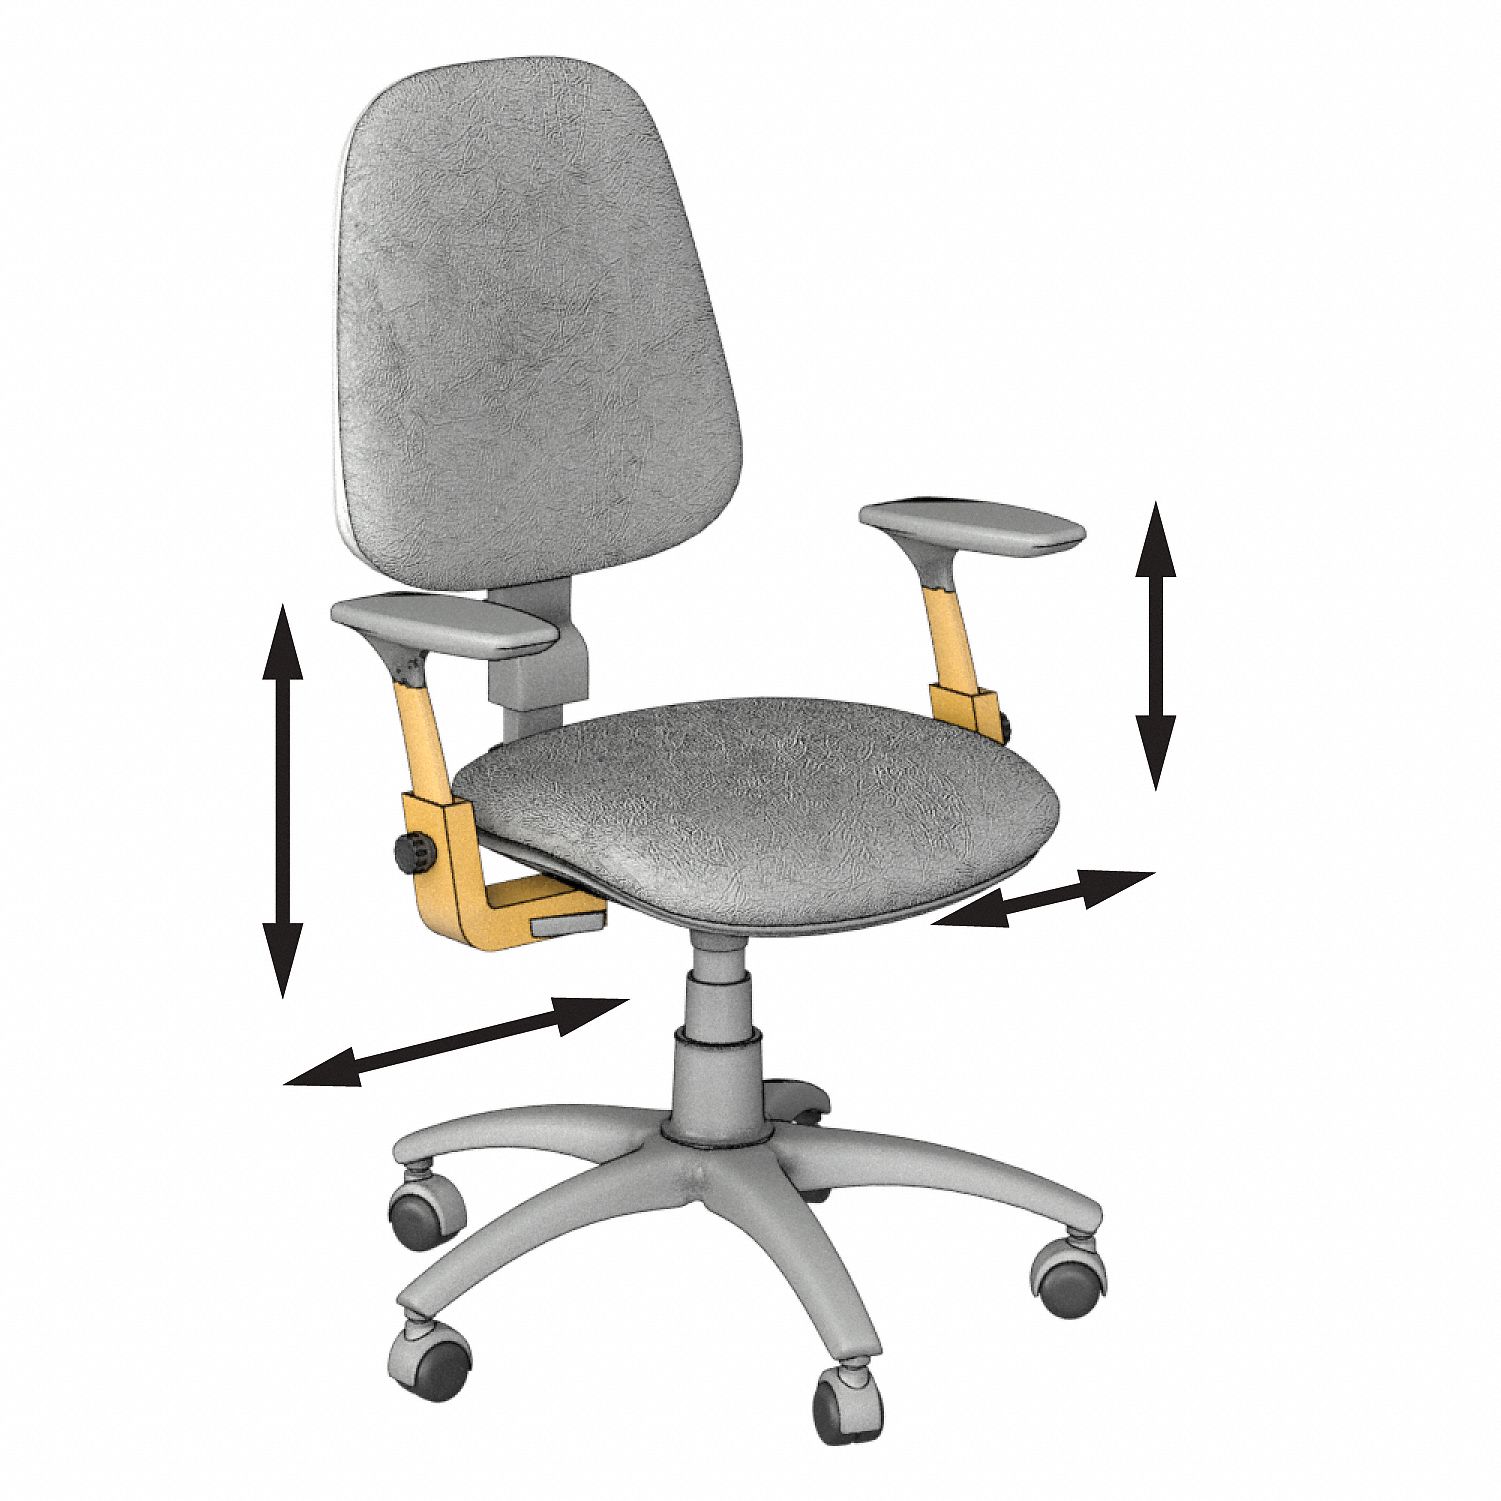 Office, Drafting, and Task Chairs Grainger Industrial Supply